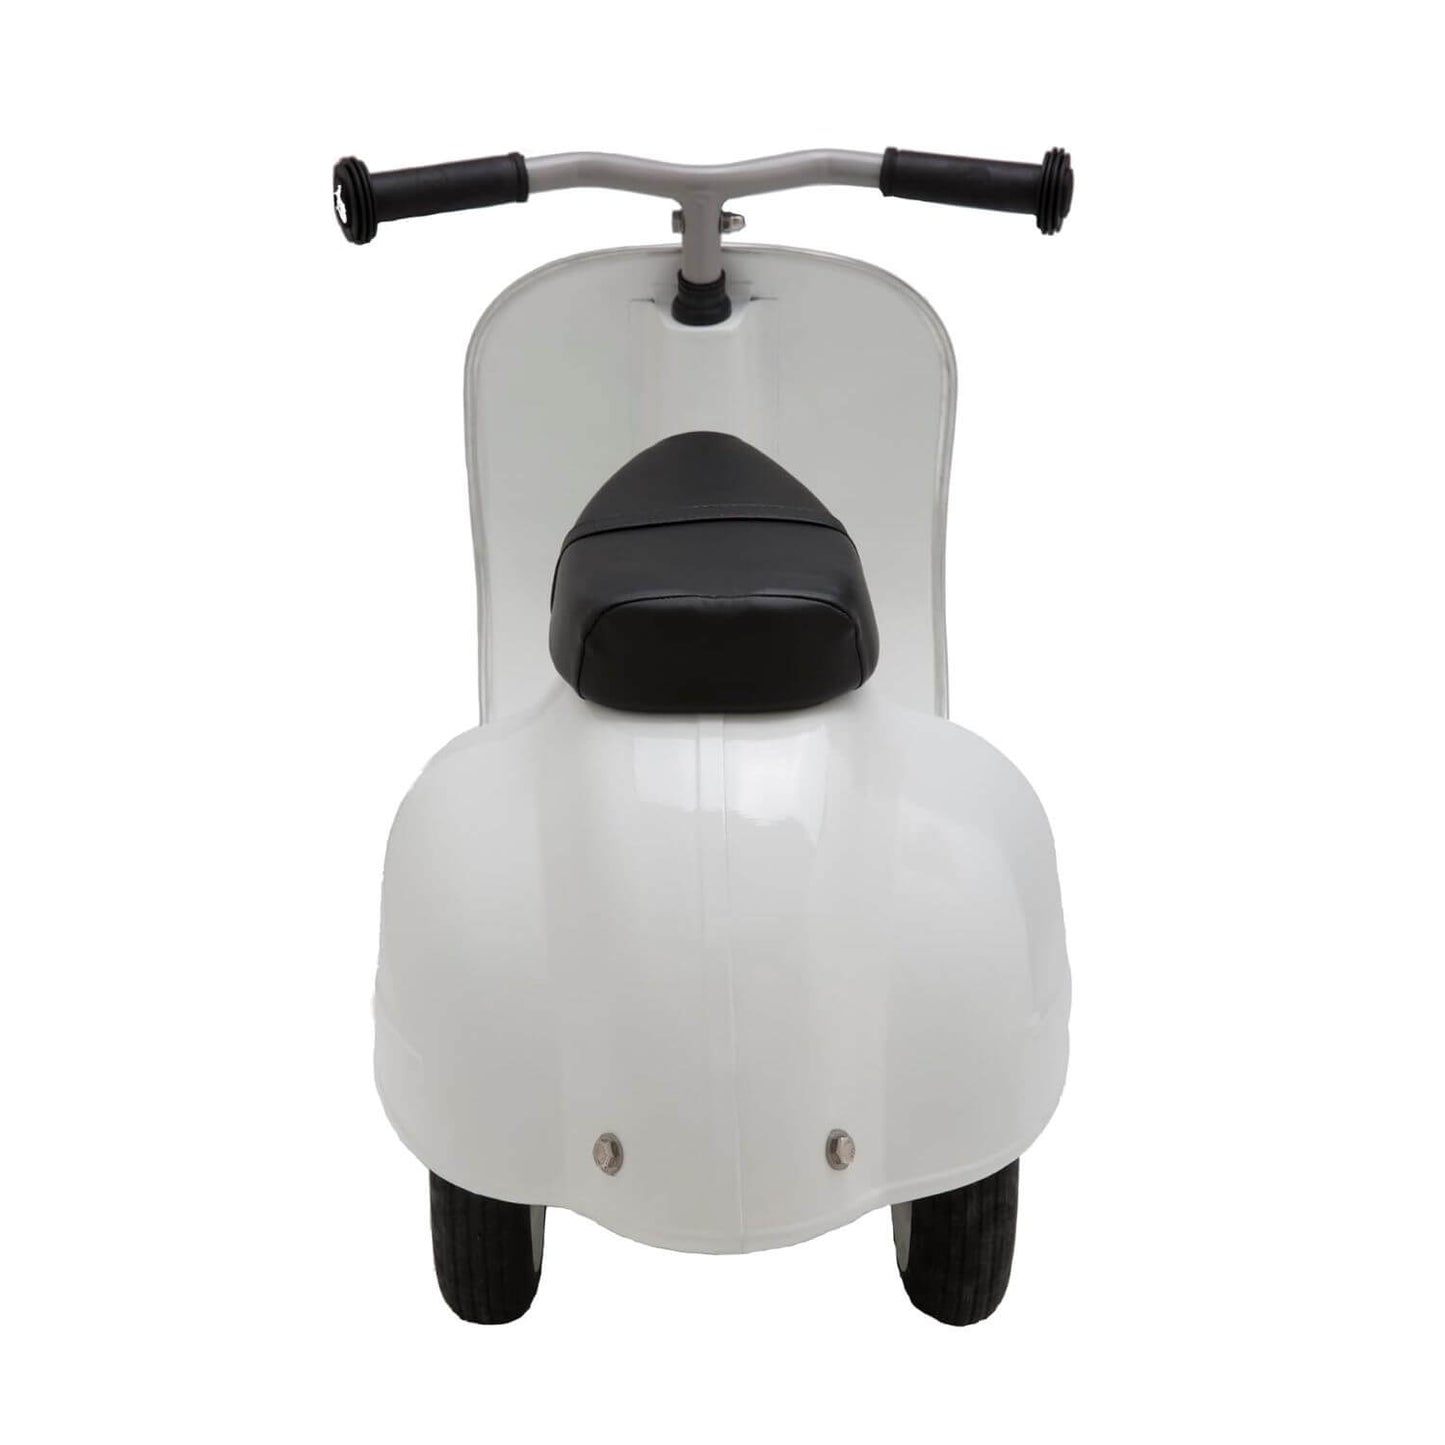 Primo Super White Ride-On Scooter - Back View